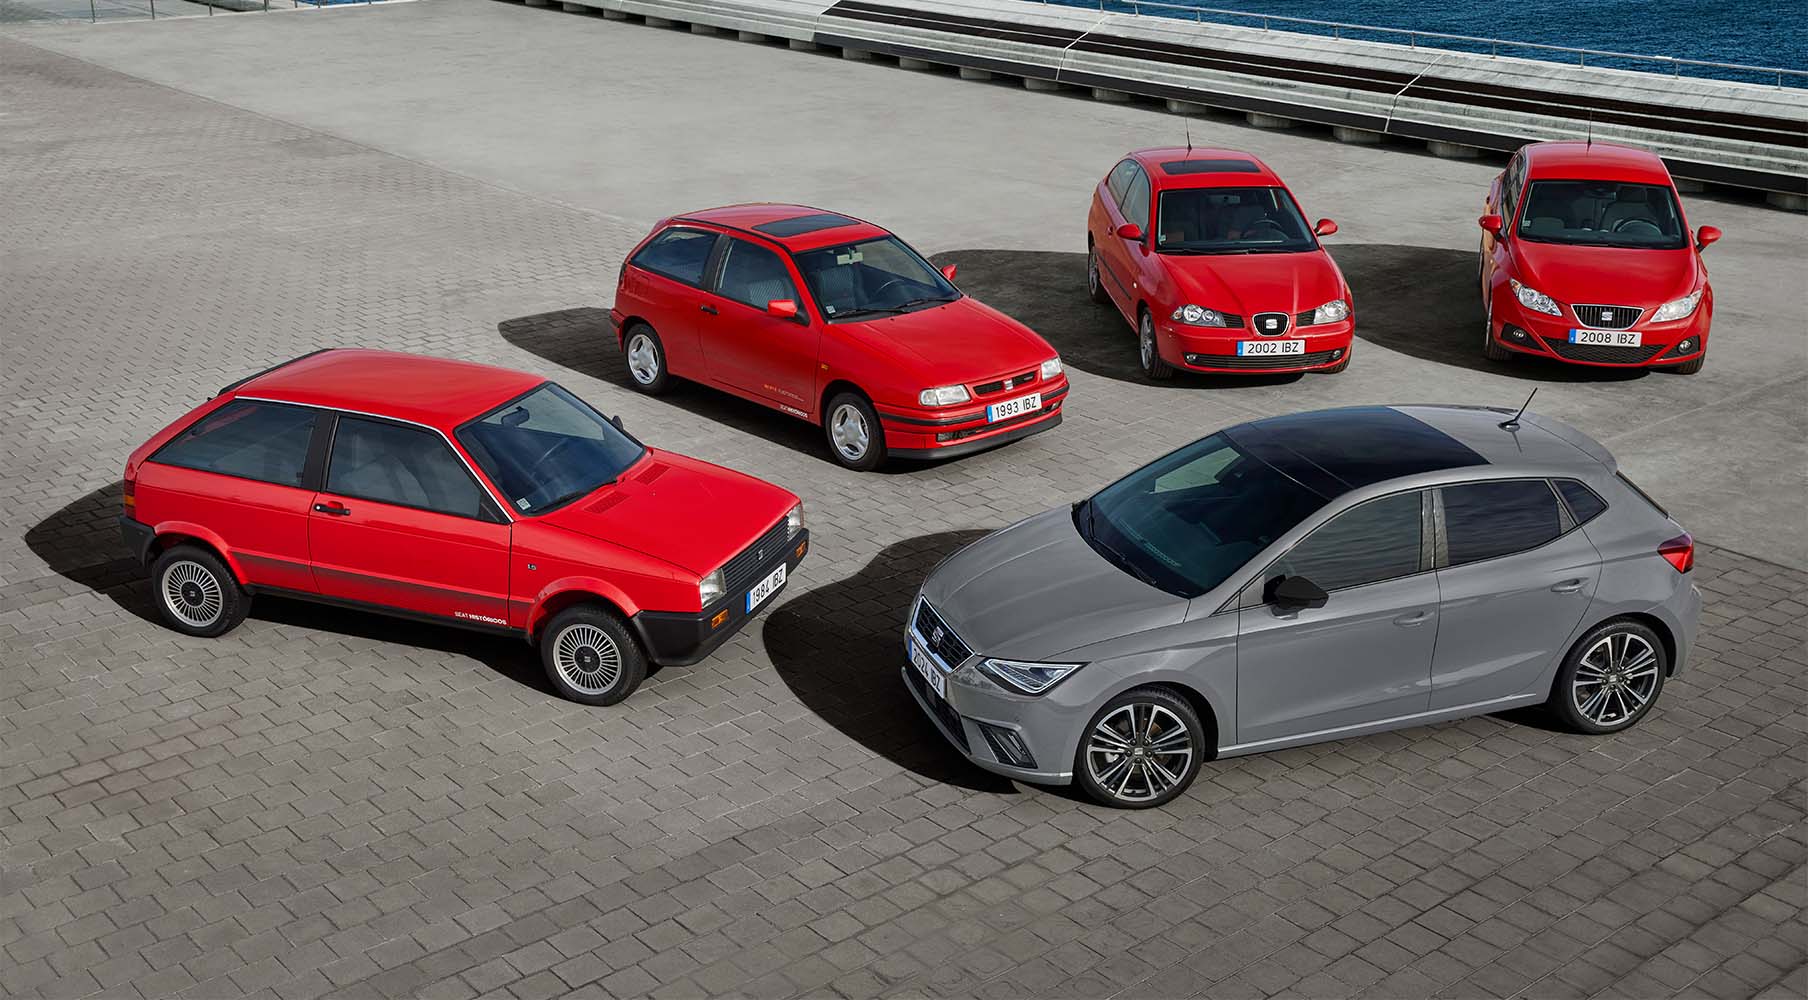 Celebrating 40 years of the seat ibiza vehicle, five different version of the iconic car